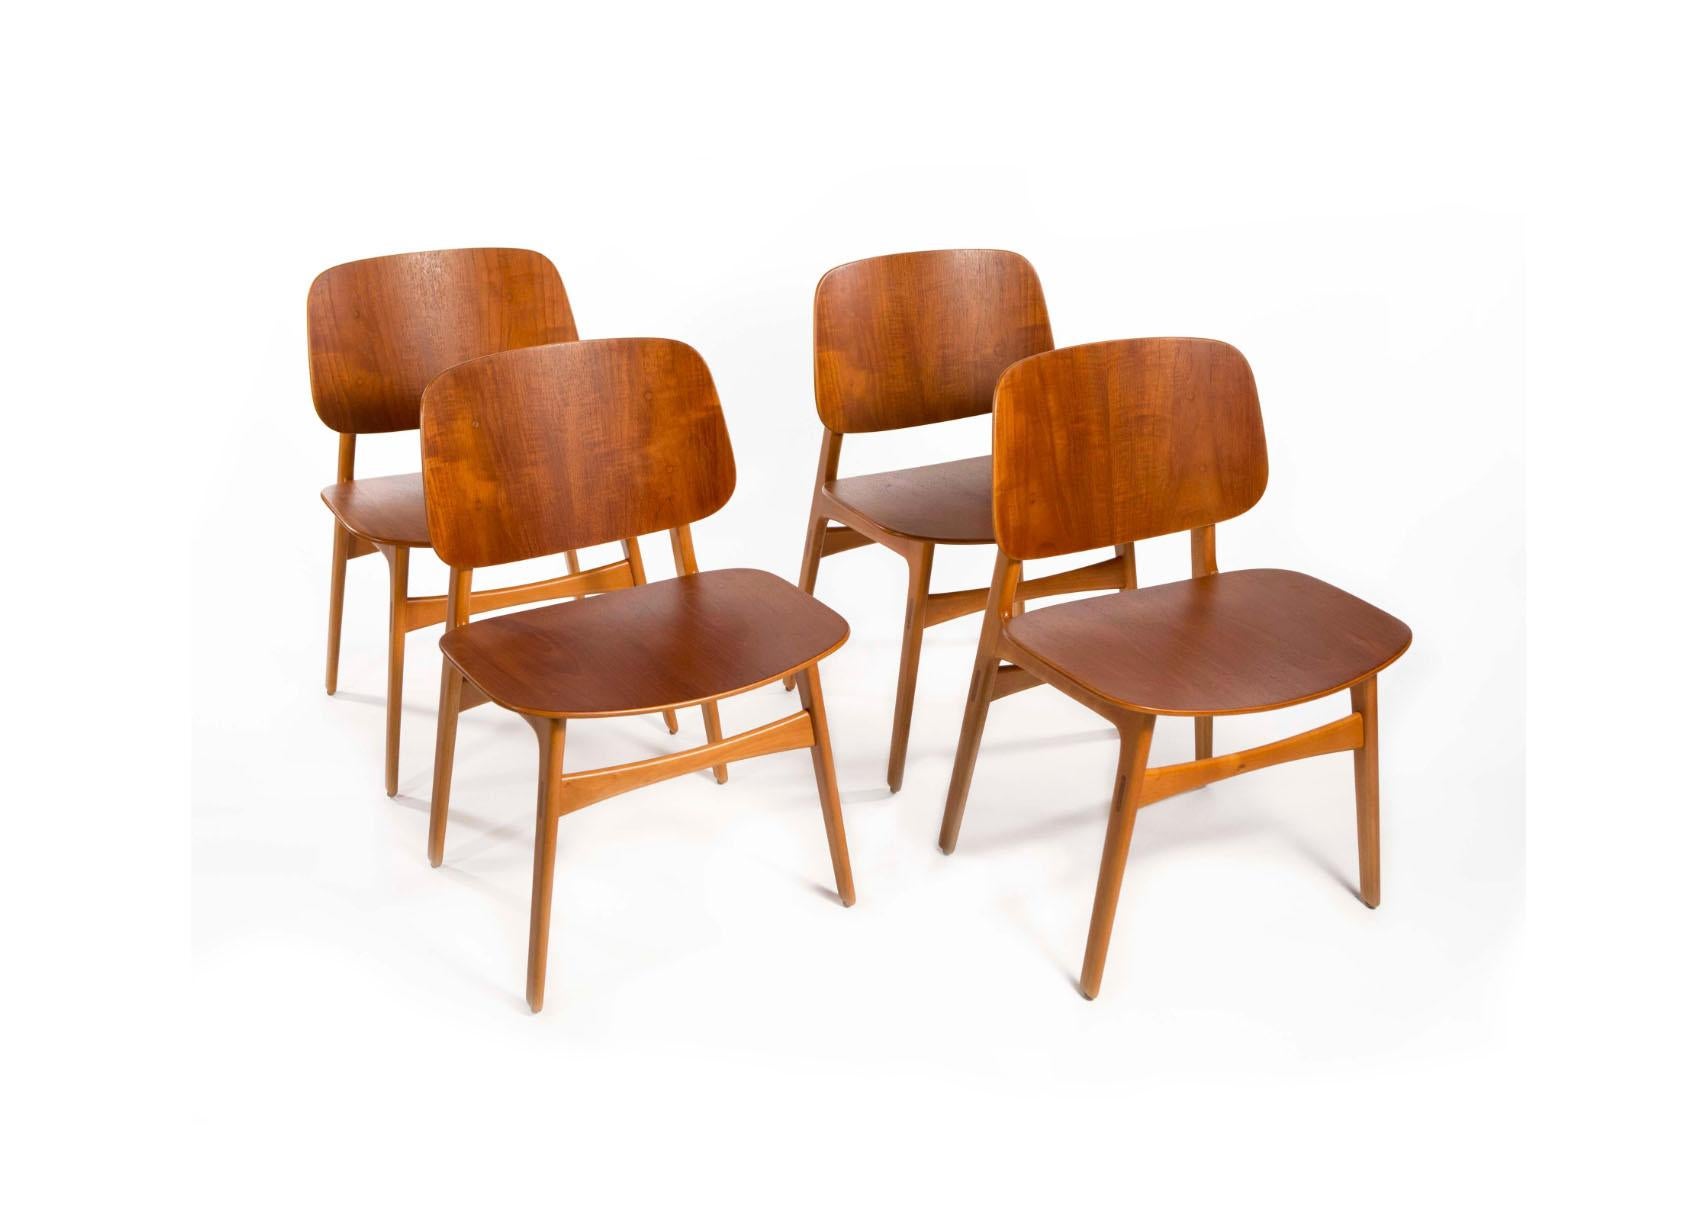 Børge Mogensen Set of 4 Dining Chairs Model 155 for Søborg Møbler Denmark 1950's

This is a beautiful set of 4 dining chairs designed by Borge Mogensen in 1949 for Soborg Denmark. The Model 155 has a solid beech wood frame and teak plywood seat and